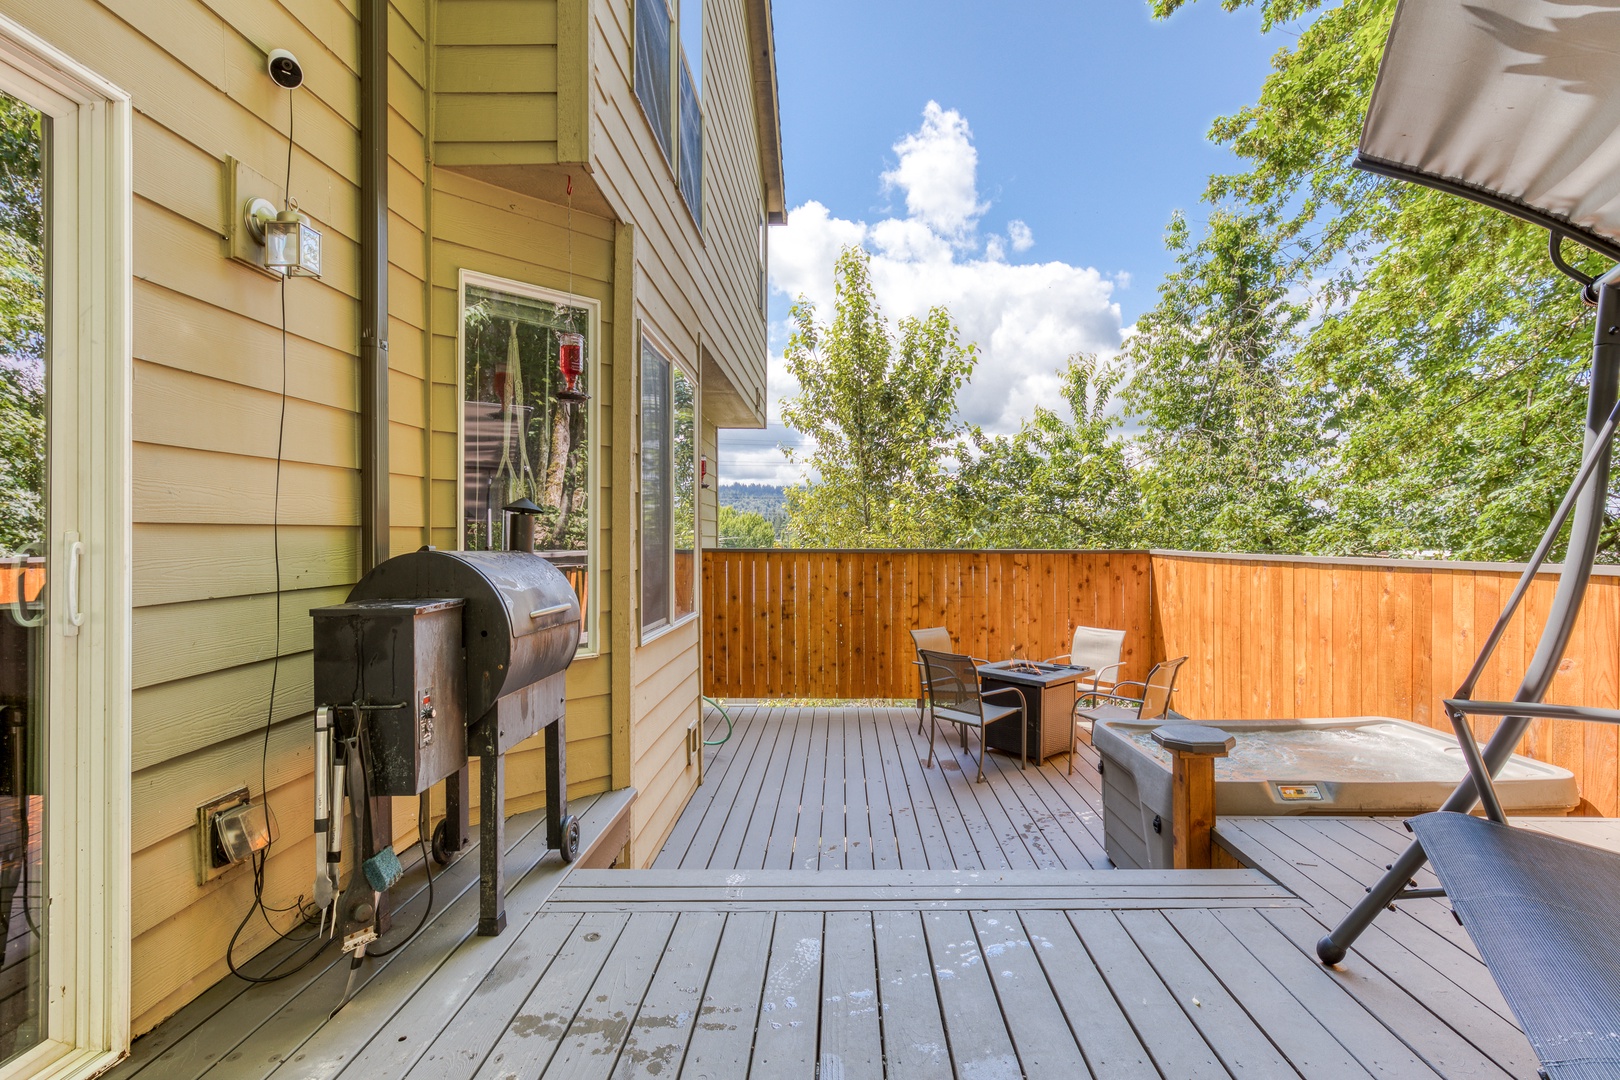 Clackamas Vacation Rentals, Duck Crossing - The back patio is large with space for all